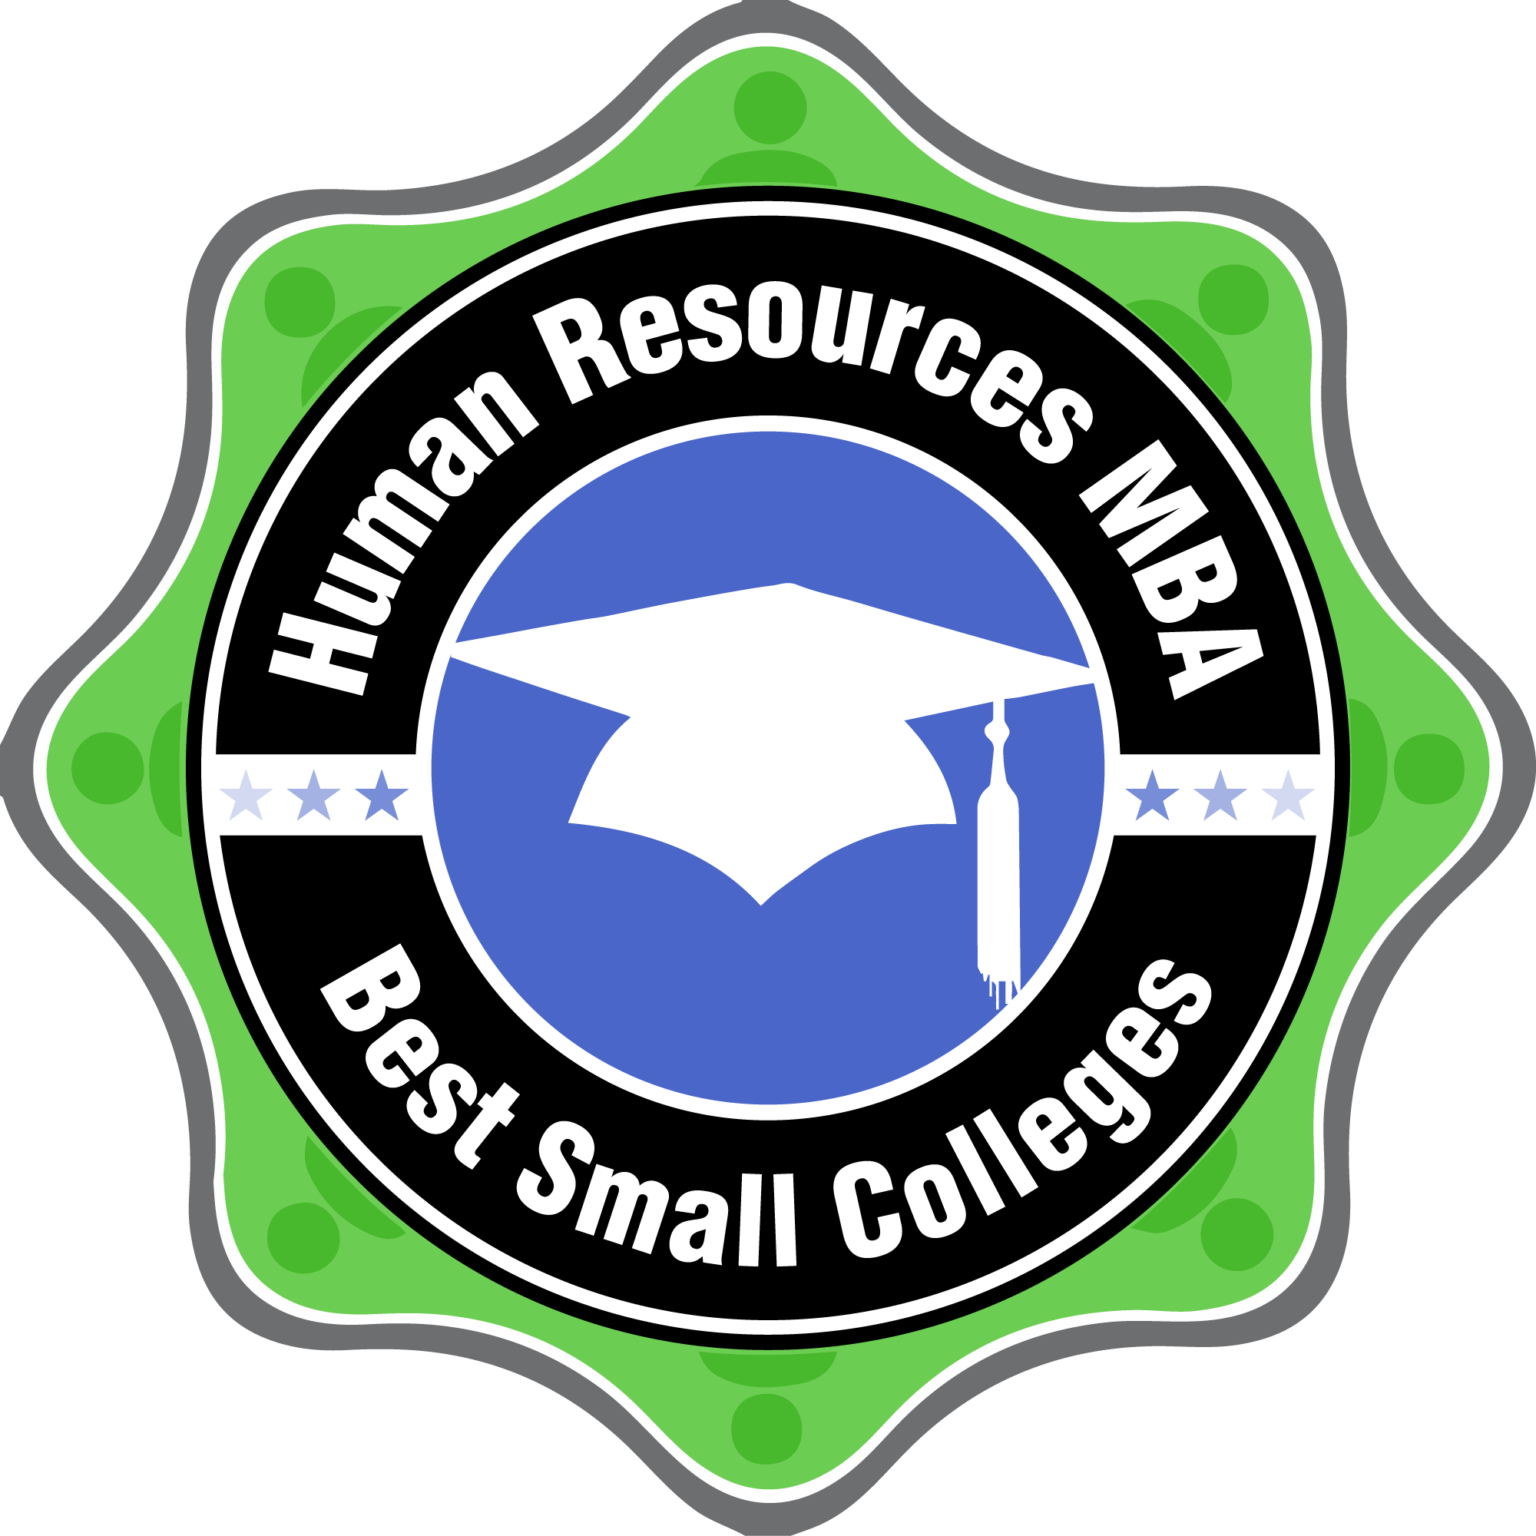 25 Best Small Colleges for a Bachelor’s in Human Resources - Human Resources Degrees